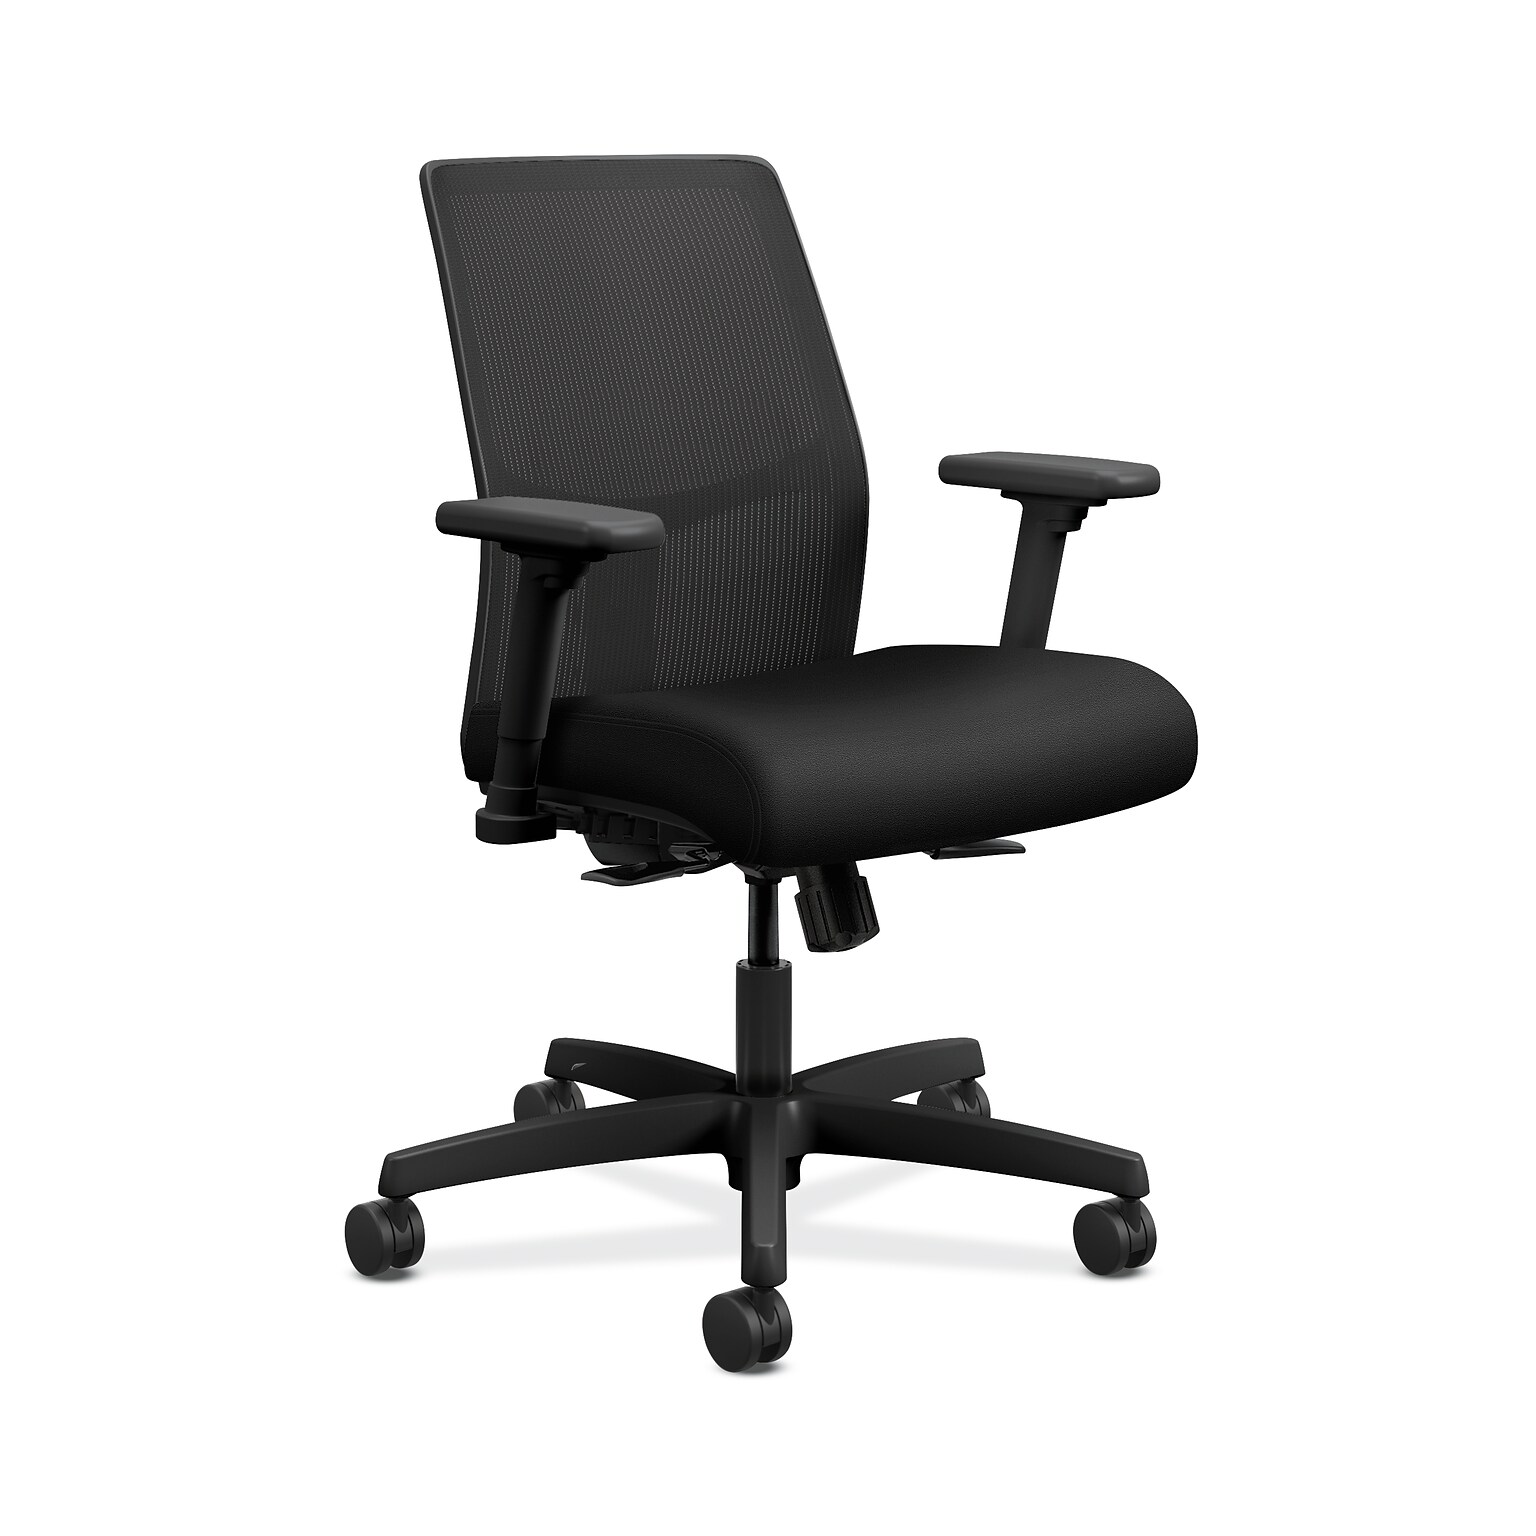 HHON Ignition ilira-Stretch Mesh/Fabric Task Chair, Height- and Width-Adjustable Arms, Black (HONI2Y1AMC10NTK)